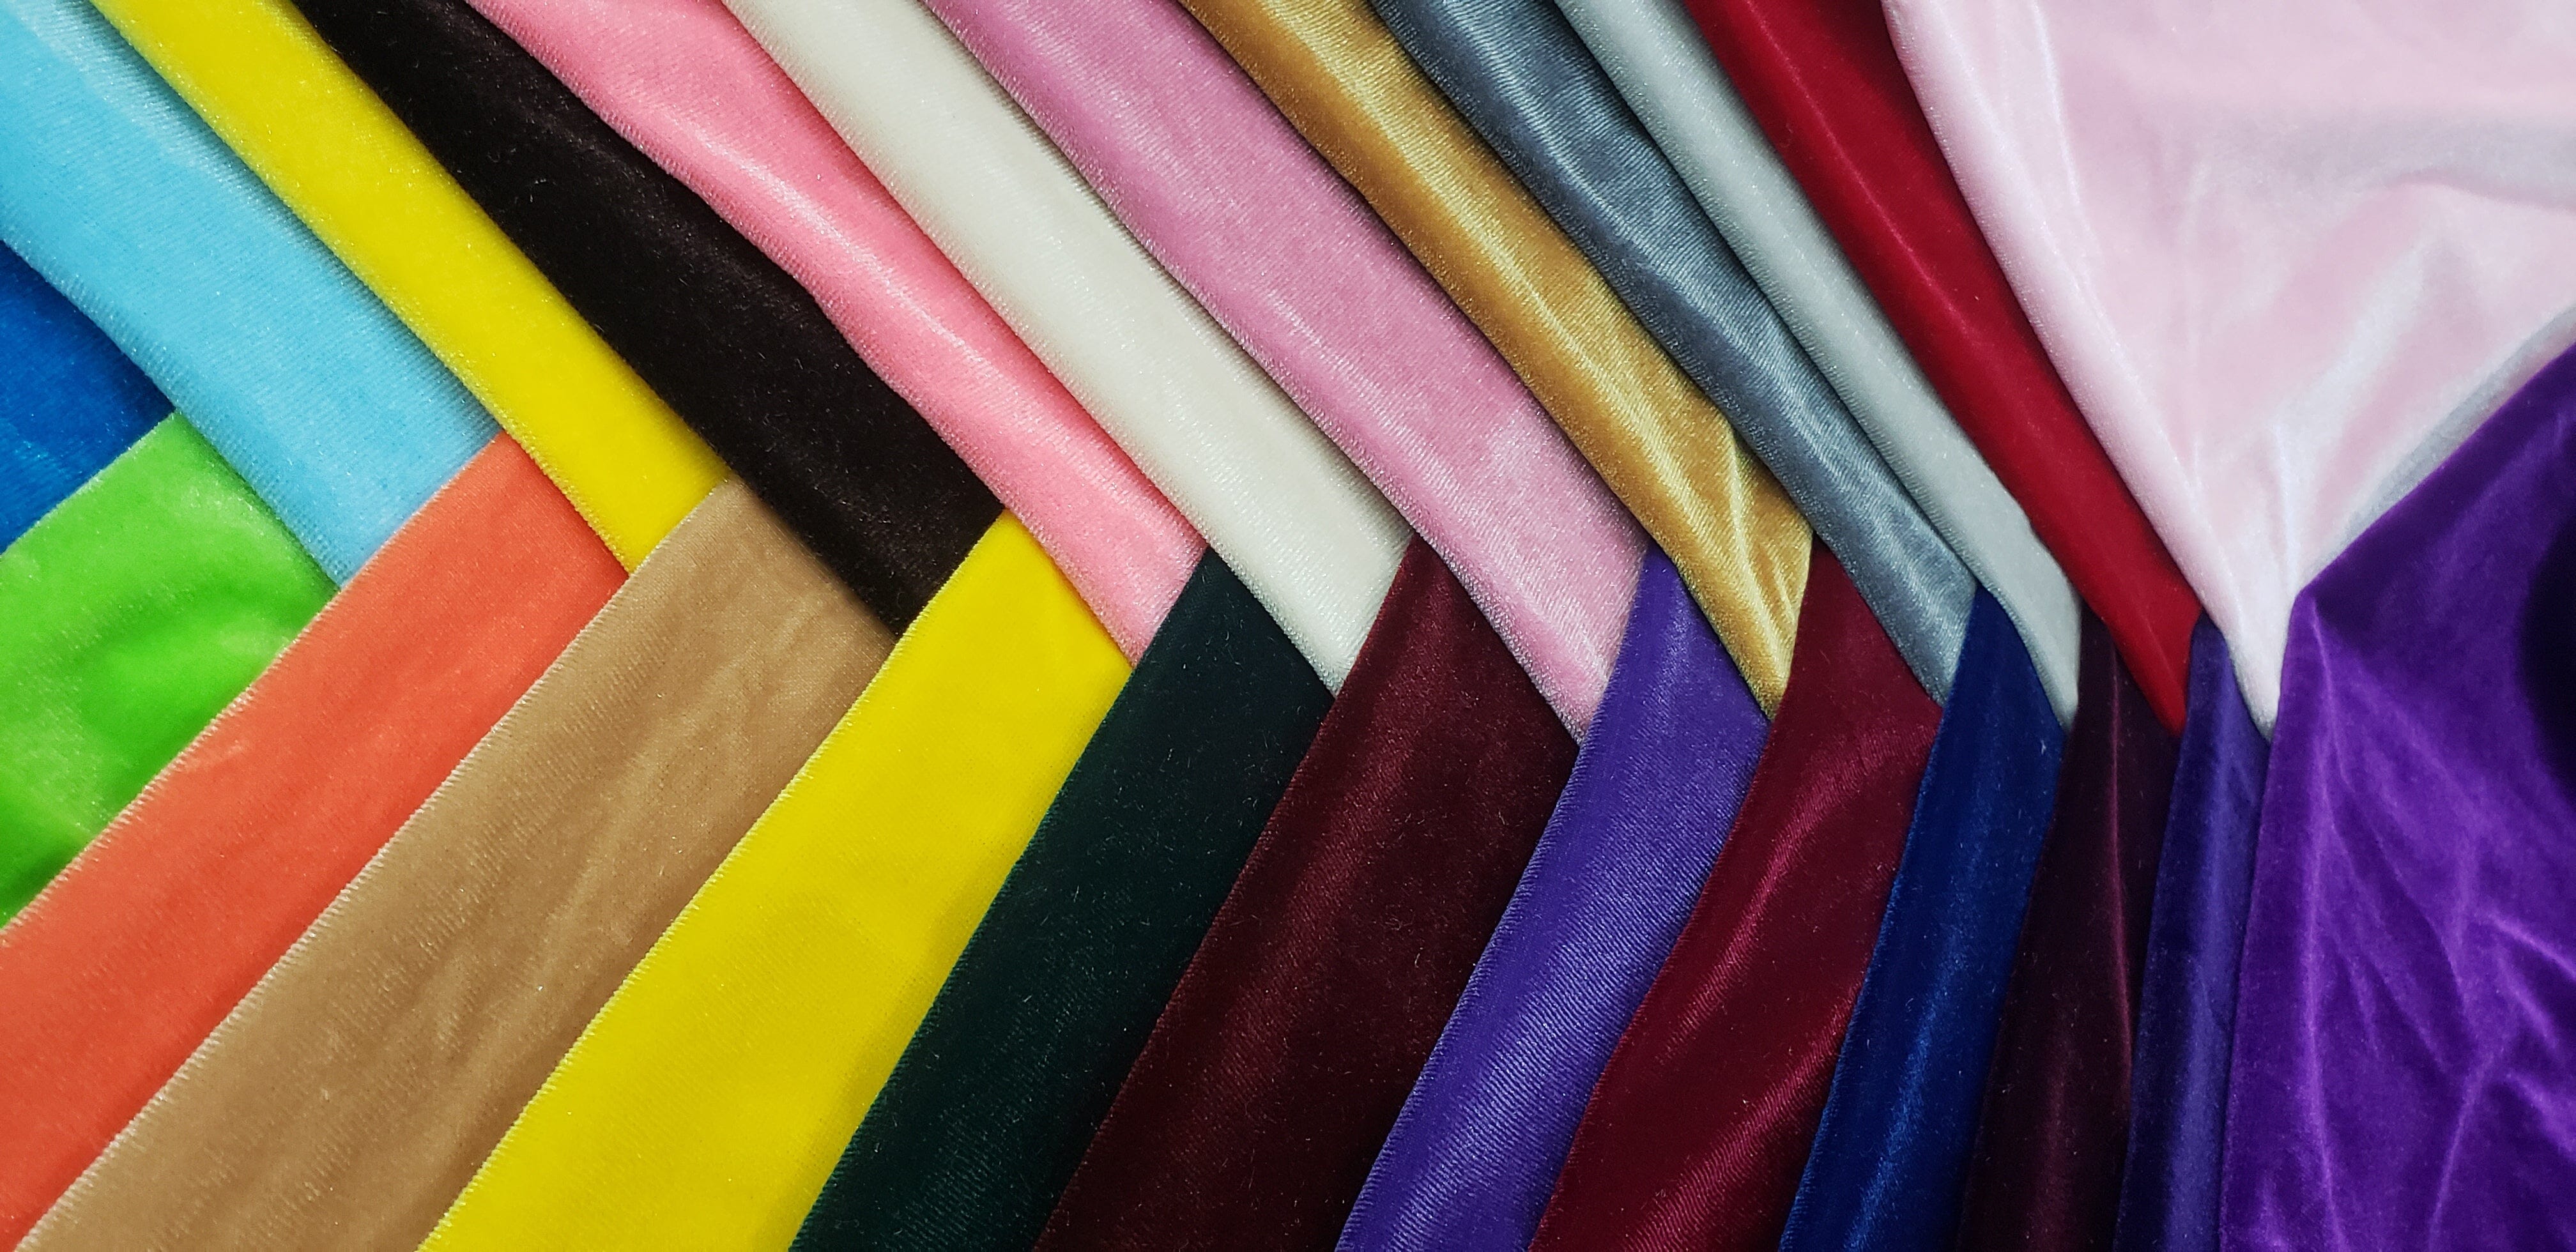 Stretch Velvet Fabric for Costumes and Crafting by The Yard (Pink,3 Yard)